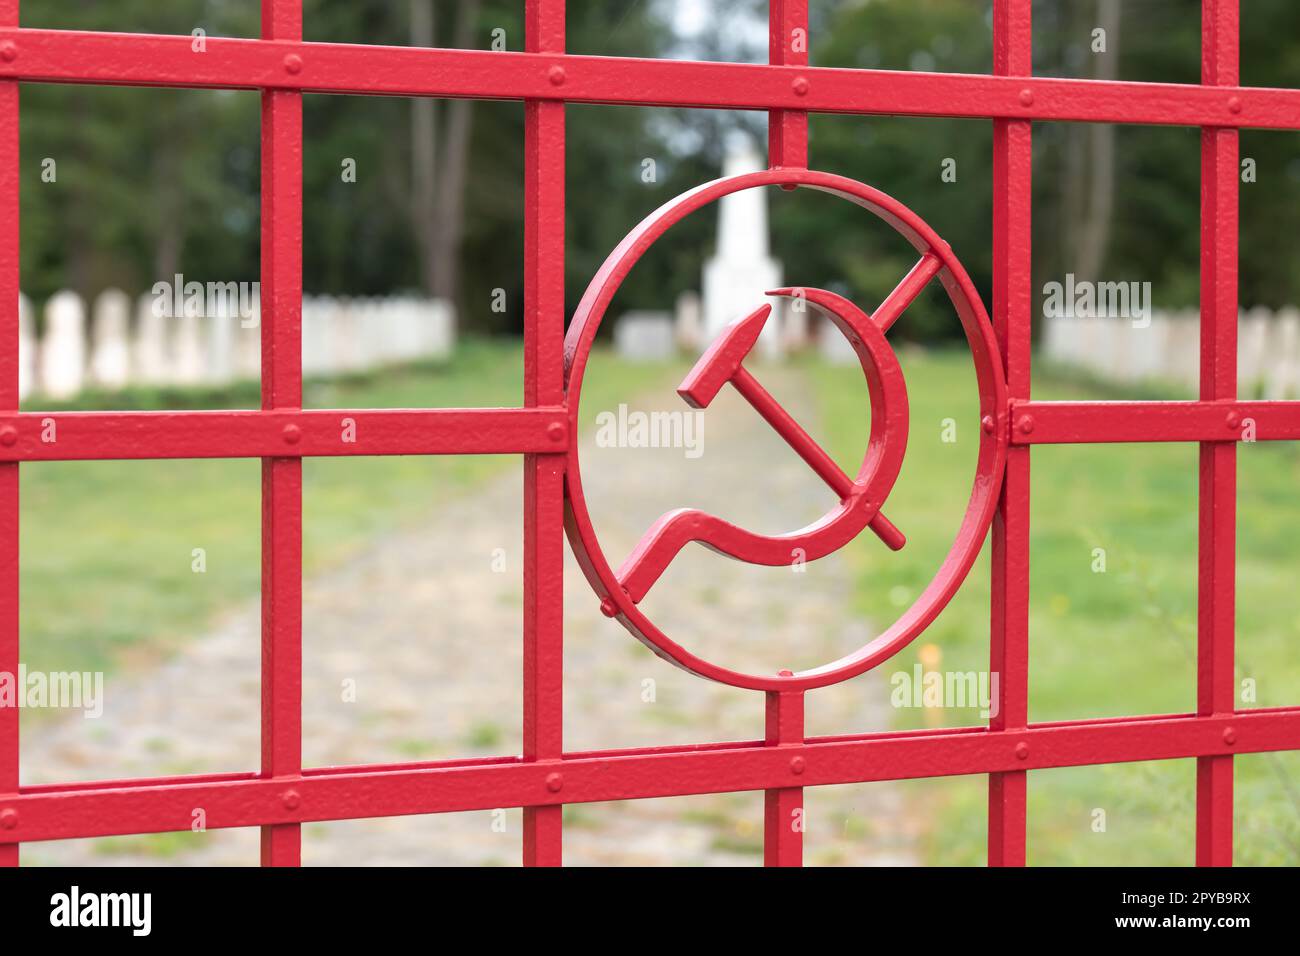 Hammer and sickle , the coat of arms of the former Soviet Union on the gate of a cemetery for fallen soldiers of the Second World War in Germany Stock Photo